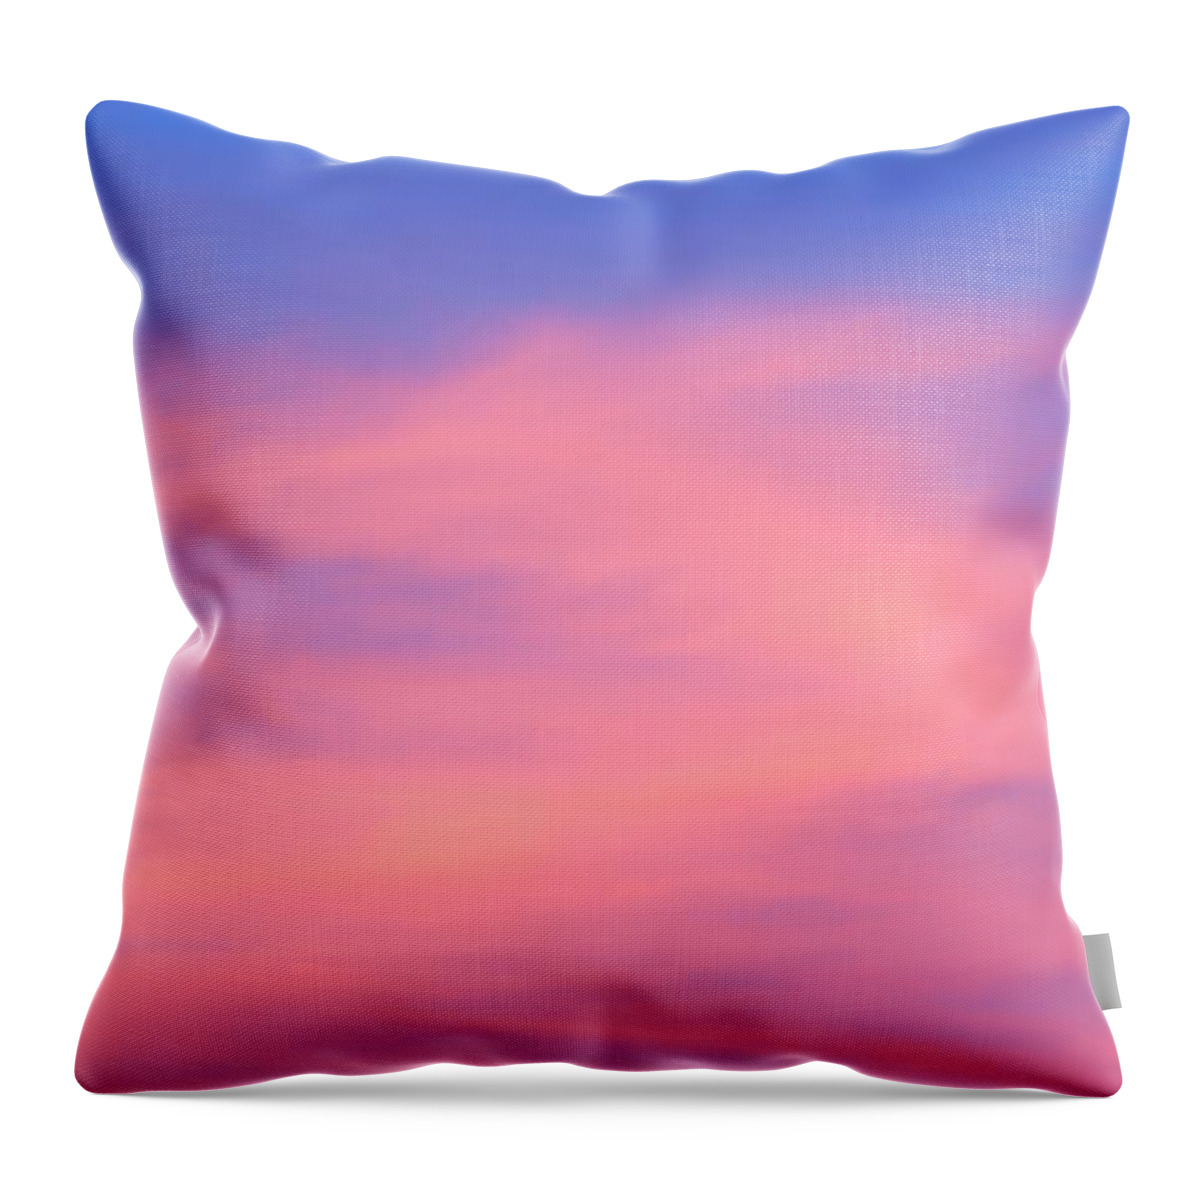 Jasper National Park Throw Pillow featuring the photograph Morning Clouds by Larry Ricker